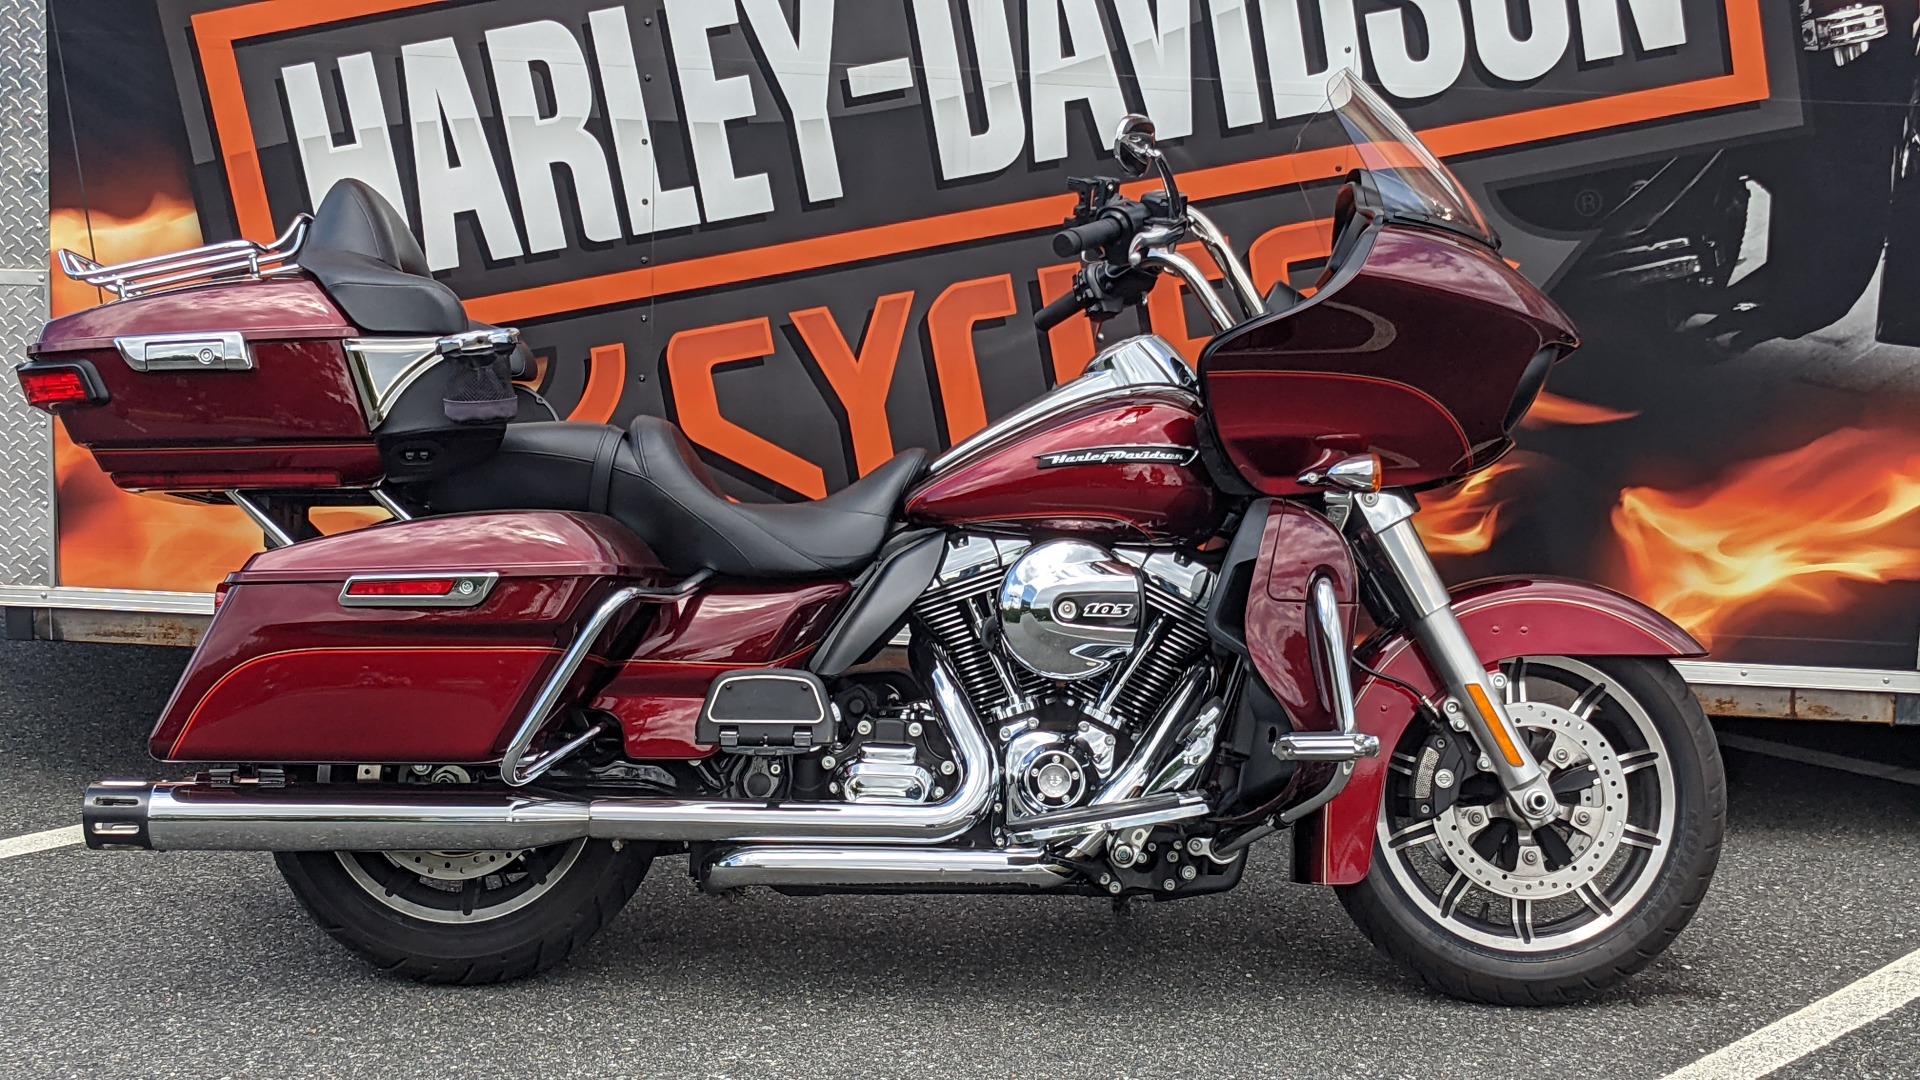 Used 2016 Harley Davidson Road Glide Ultra Motorcycles In Fredericksburg Va 679300 Mysterious Red Sunglo Velocity Red Sunglo